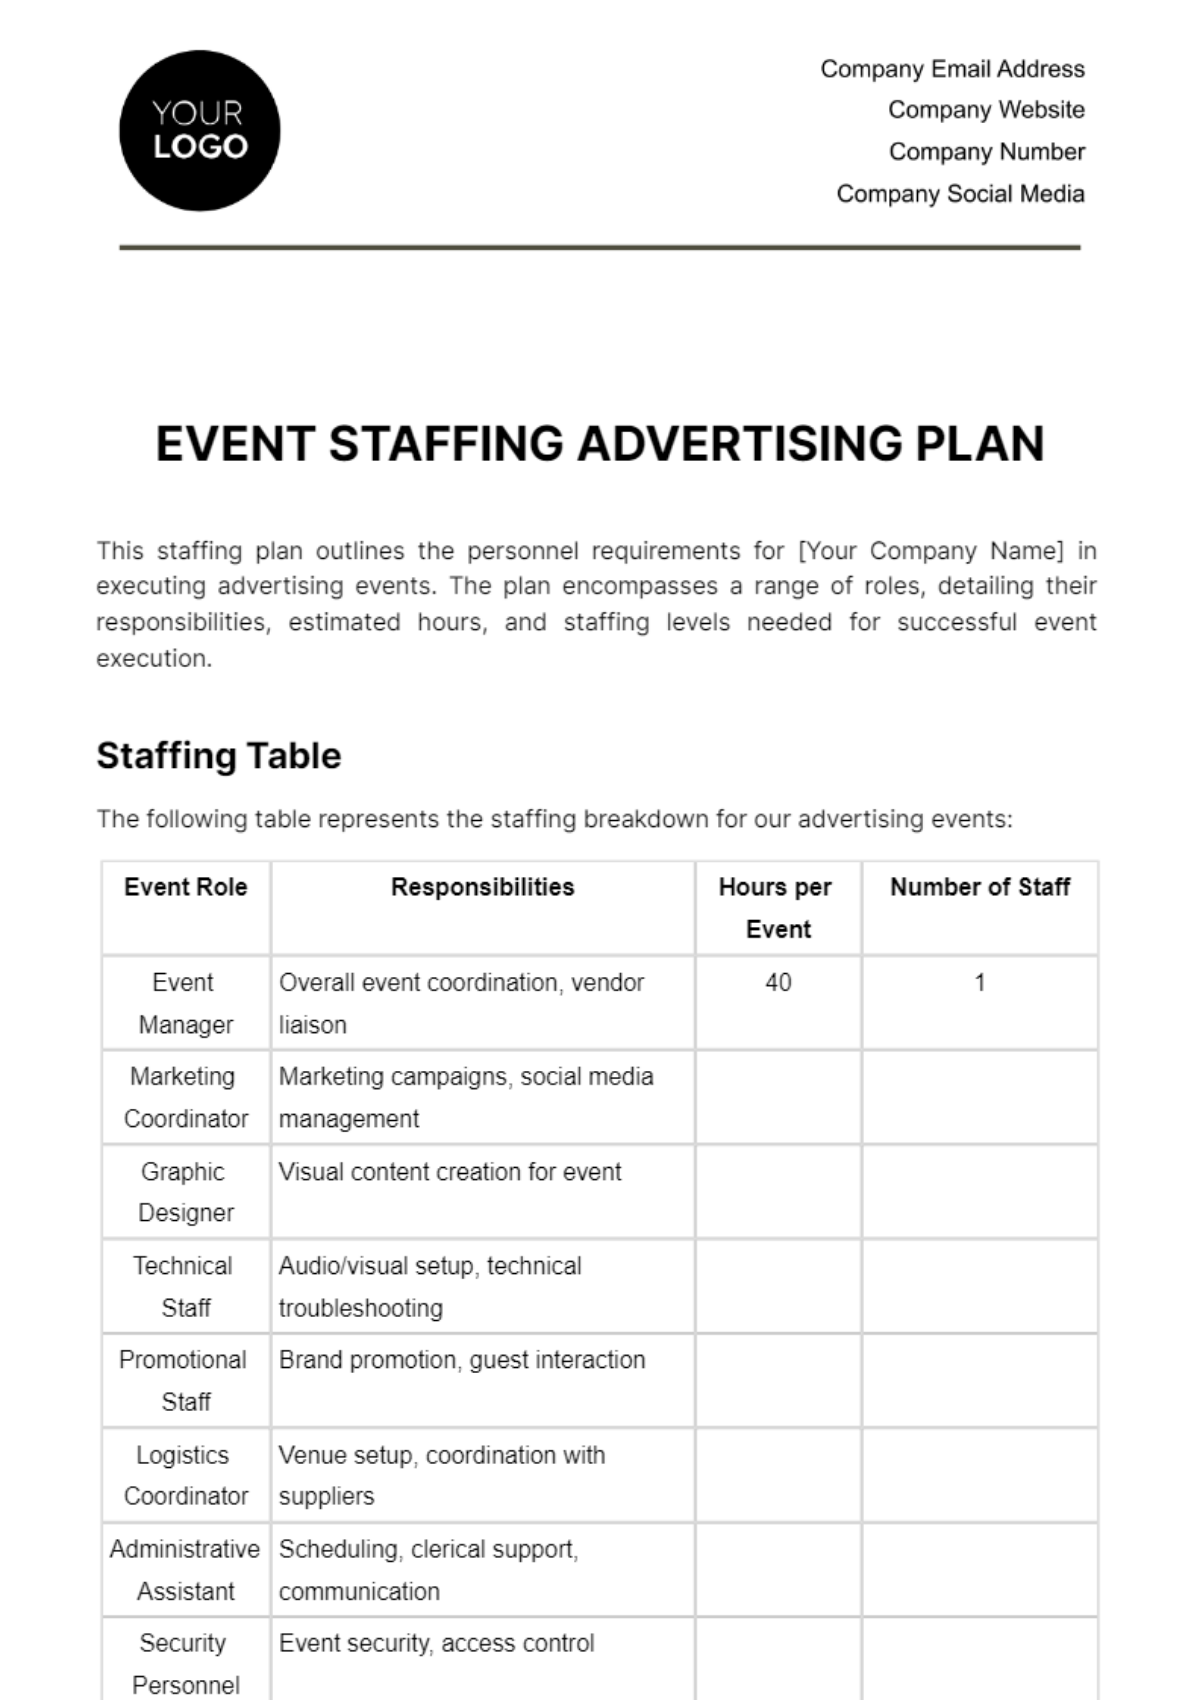 Free Event Staffing Advertising Plan Template